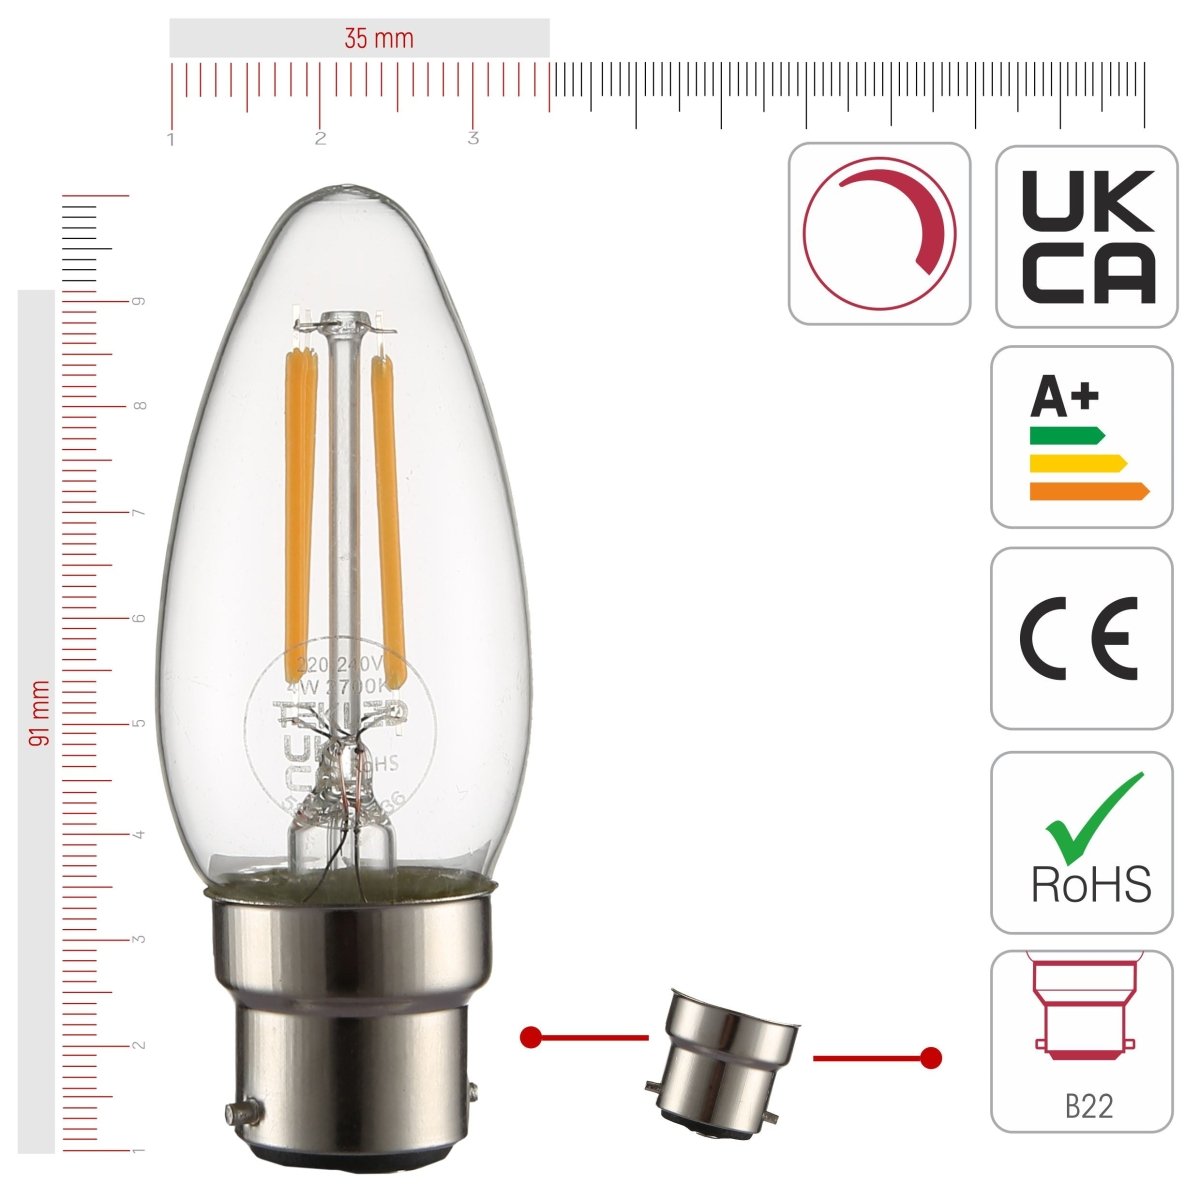 Size and certifications of LED Dimmable Filament Bulb C35 Candle B22 Bayonet Cap 4W 470lm Warm White 2700K Clear Pack of 6 | TEKLED 583-150636